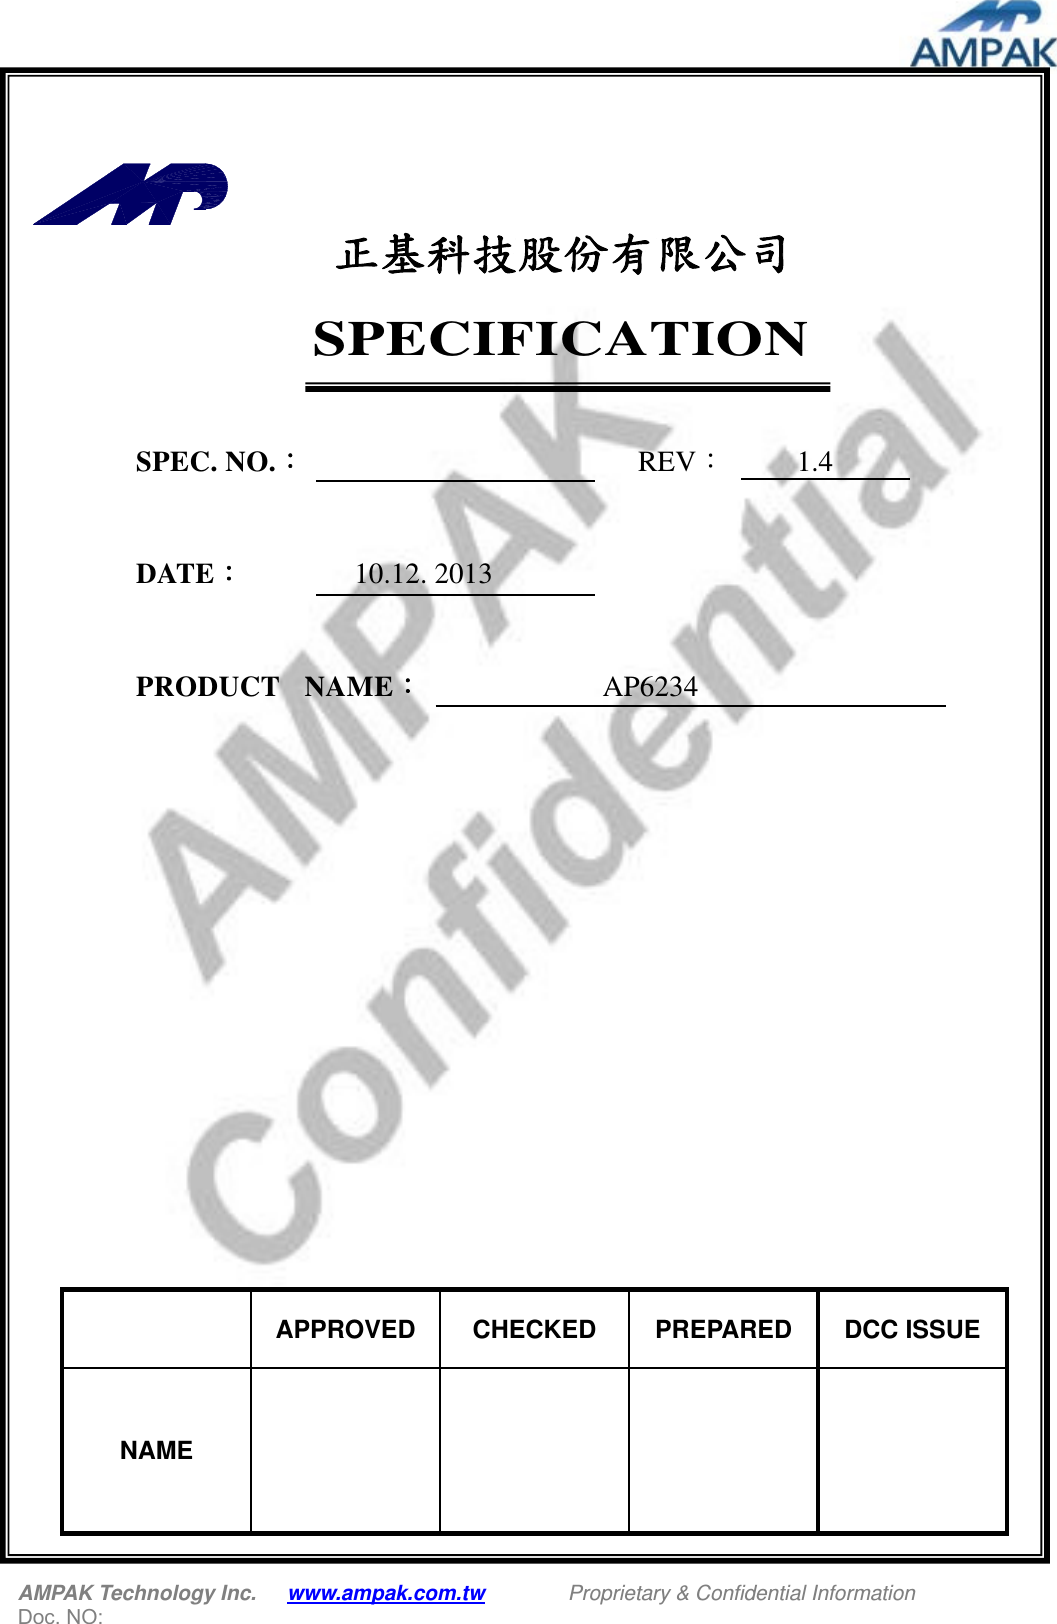  AMPAK Technology Inc.      www.ampak.com.tw        Proprietary &amp; Confidential Information   Doc. NO:     正基科技股份有限公司   SPECIFICATION  SPEC. NO.：  REV：    1.4  DATE：  10.12. 2013  PRODUCT  NAME： AP6234             APPROVED CHECKED PREPARED DCC ISSUE NAME        